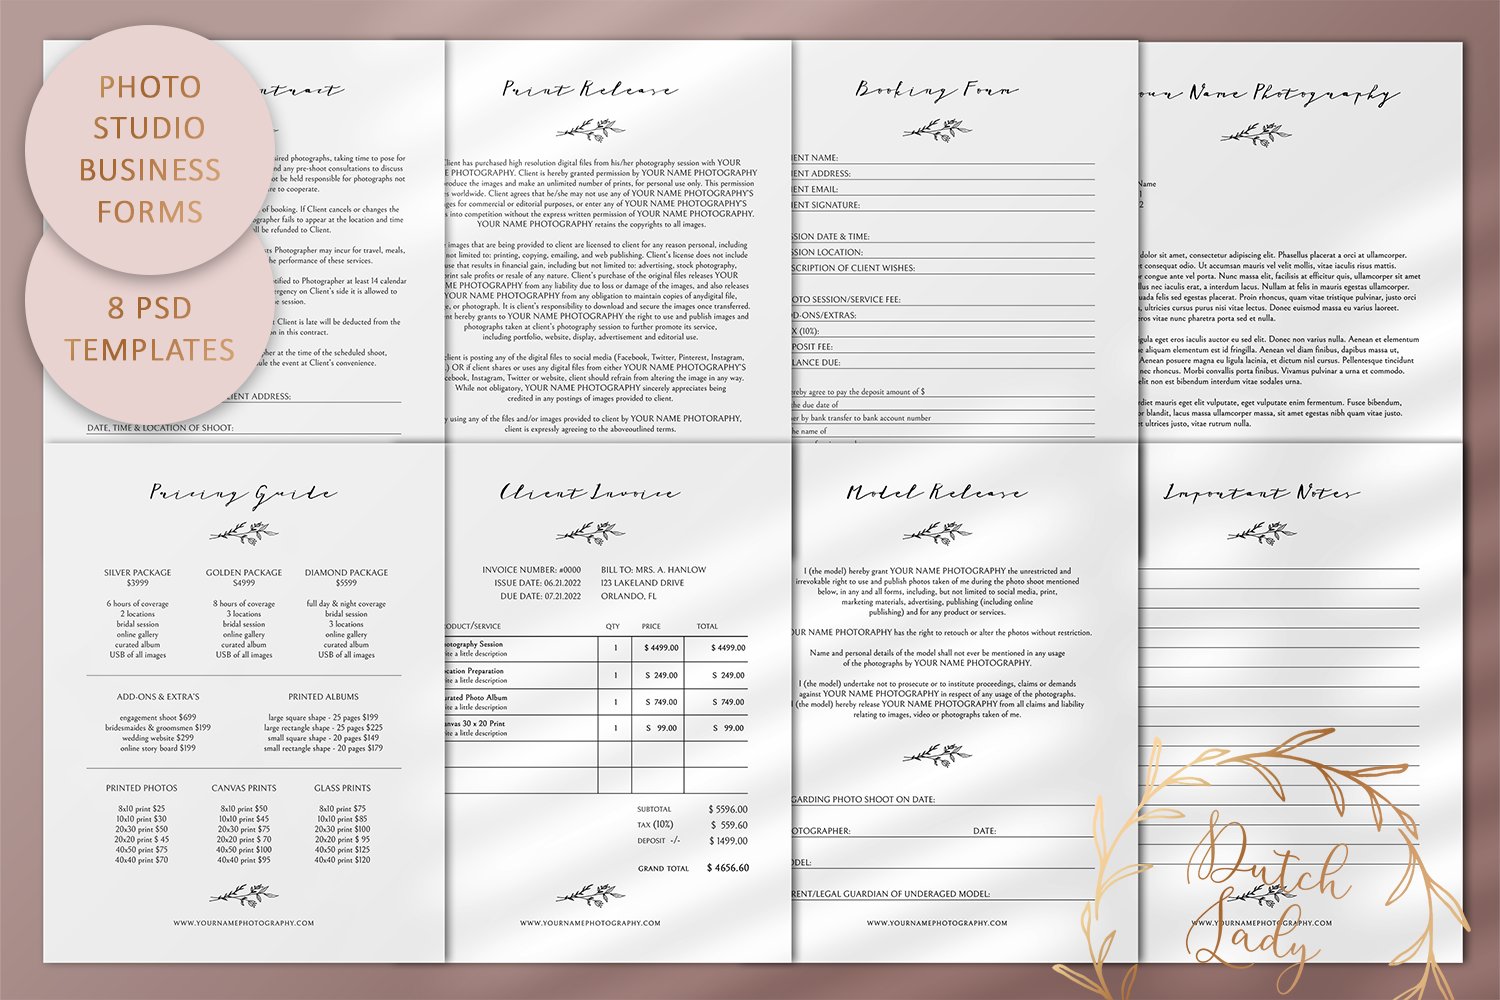 Photography Business Contract Bundle cover image.